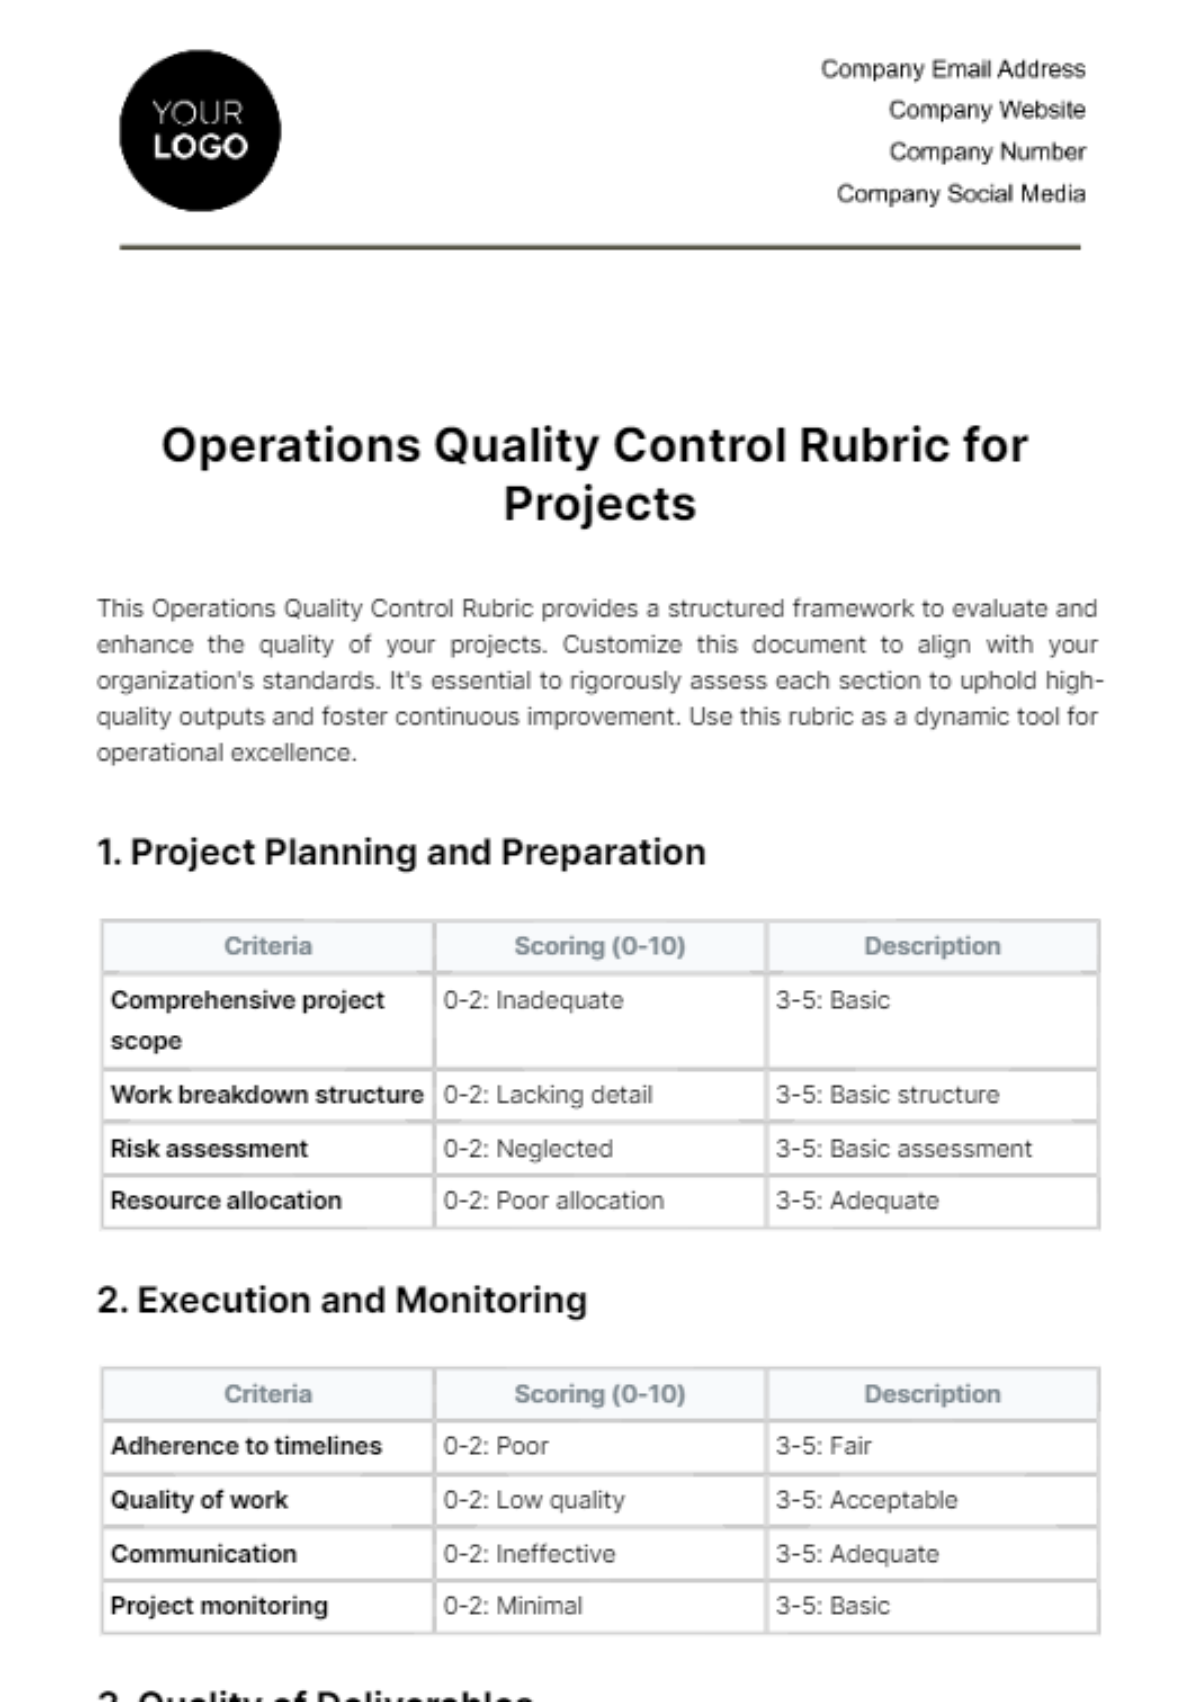 Operations Quality Control Rubric for Projects Template